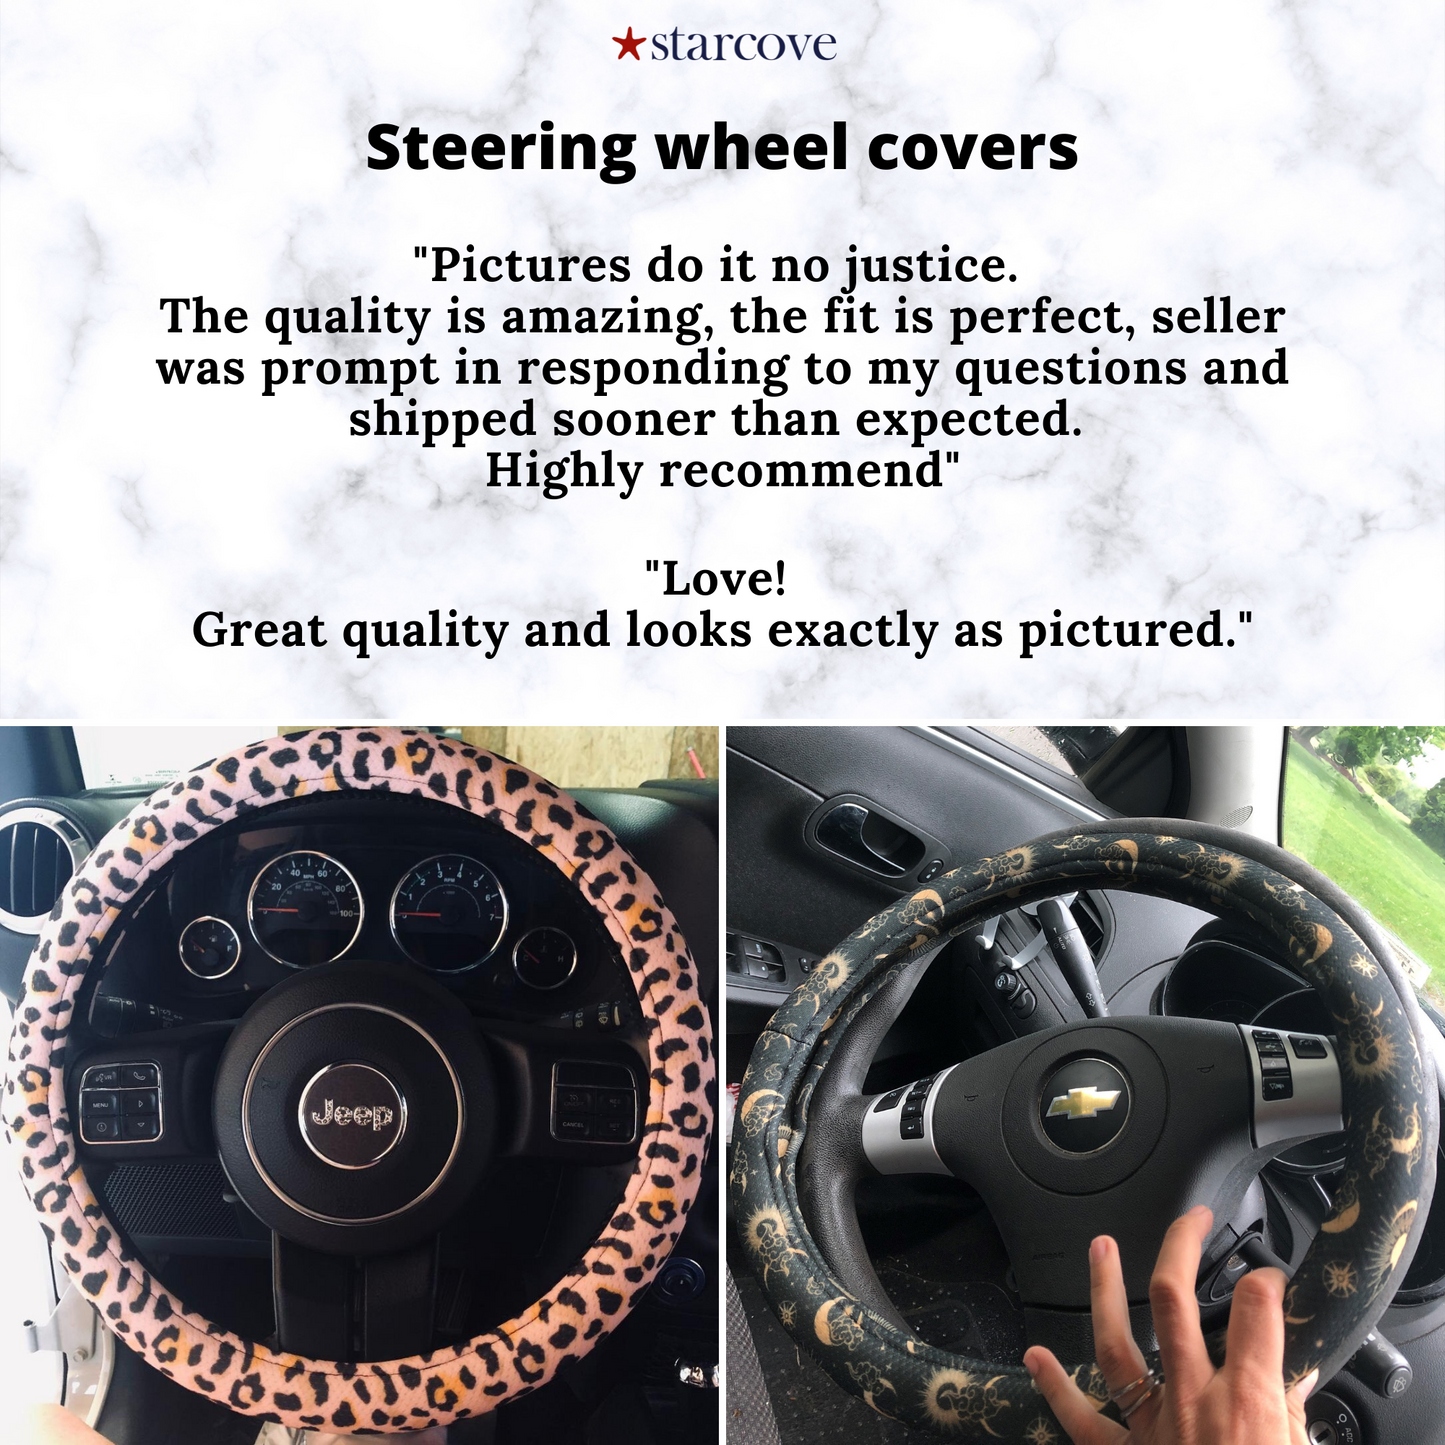 Sun Moon Steering Wheel Cover with Anti-Slip Insert, Black Celestial Astrology Witchy Goth Women Print Car Auto Wrap Protector Accessories Starcove Fashion